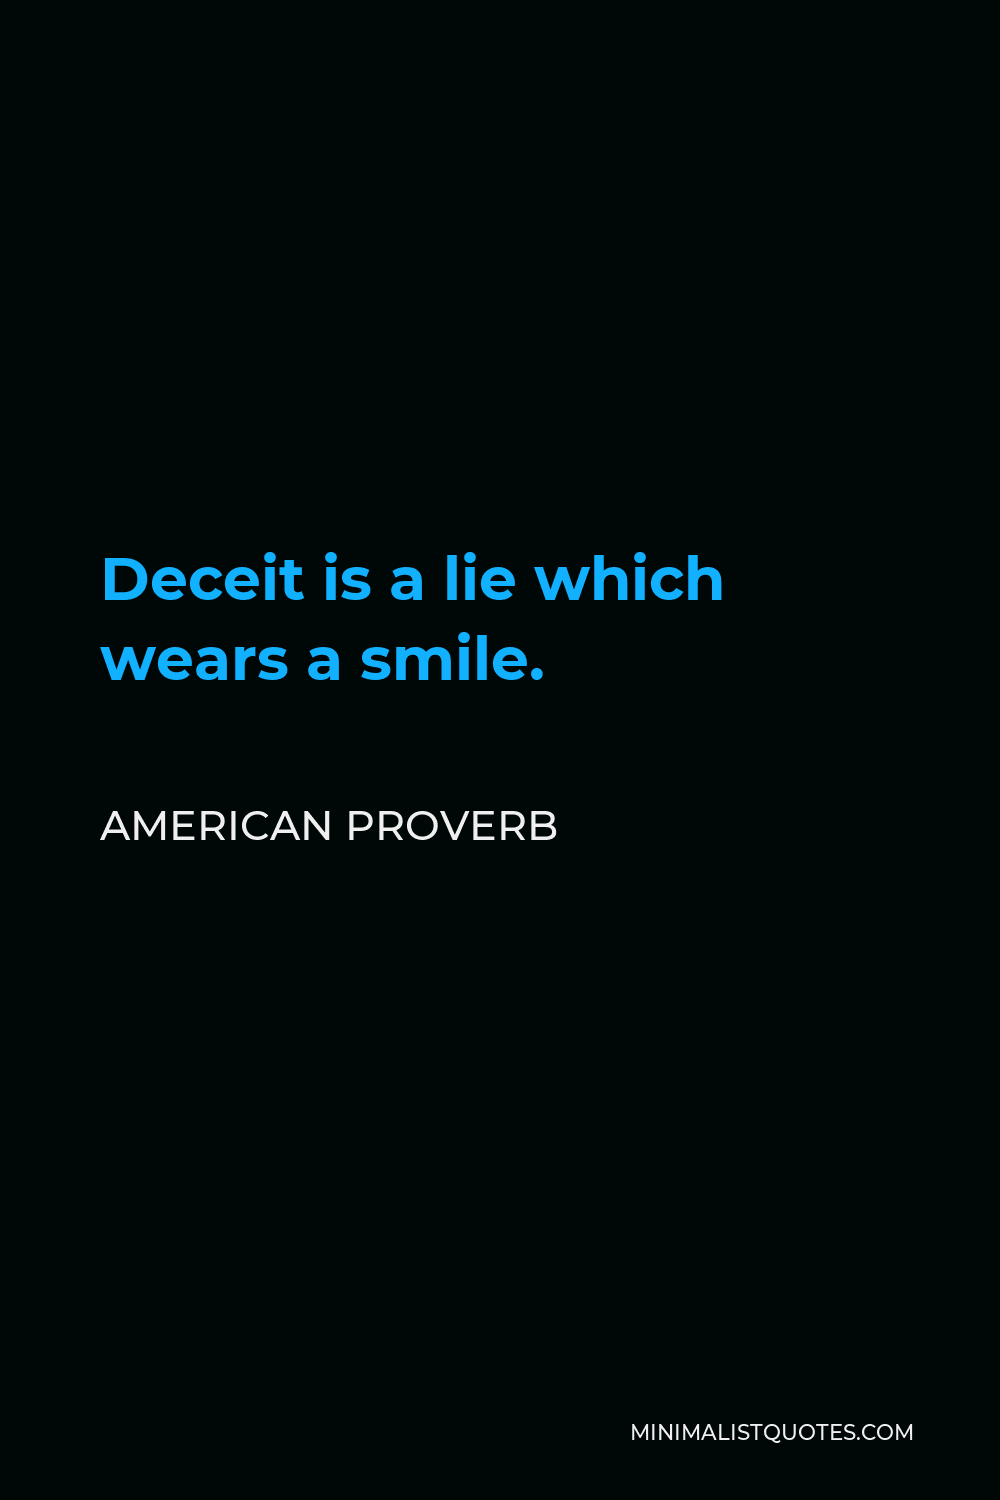 American Proverb Quote - Deceit is a lie which wears a smile.